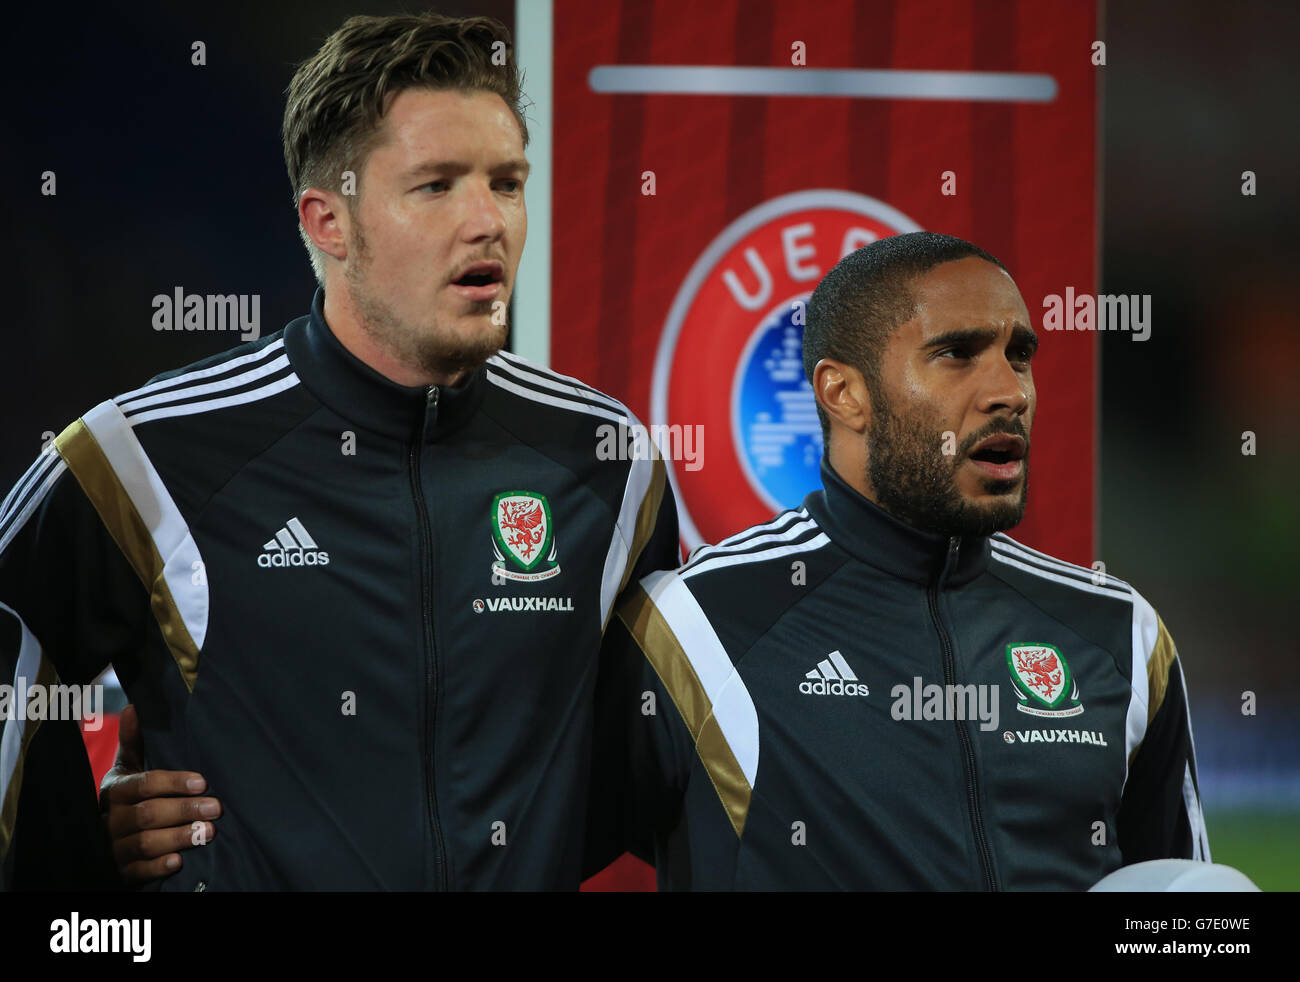 Wales captain Ashley Williams (right) and Wales' goalkeeper Wayne Hennessey during the UEFA Euro 2016 qualifying match at the Cardiff City Stadium, Cardiff. Stock Photo